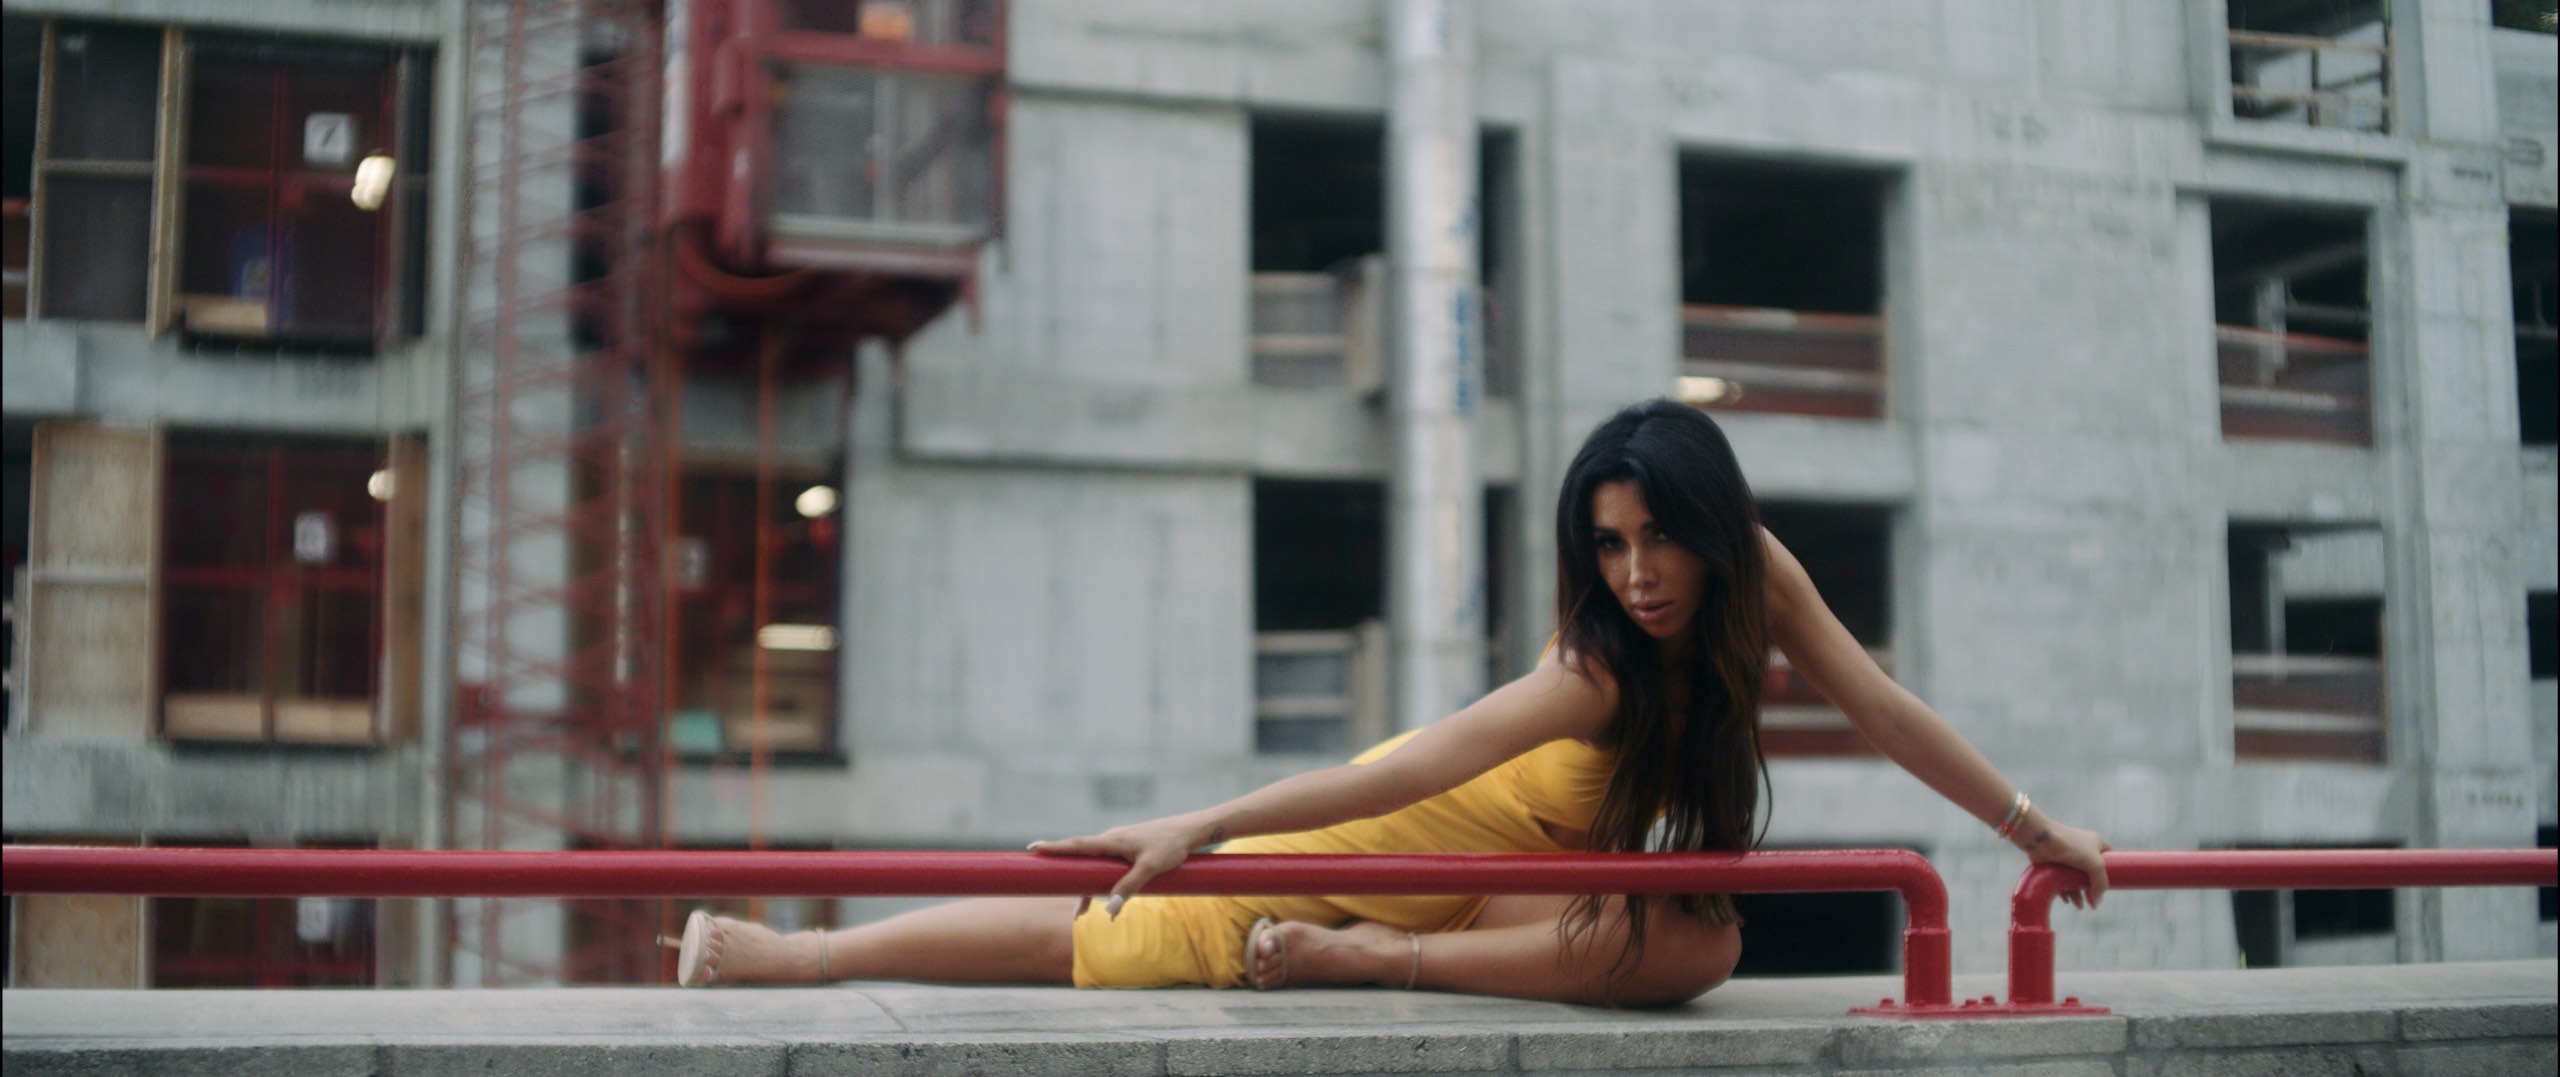 Metisha Model Profile from the Fort Lauderdale Talent Pool Metisha posing in a yellow dress on the ledge of building holding red railing